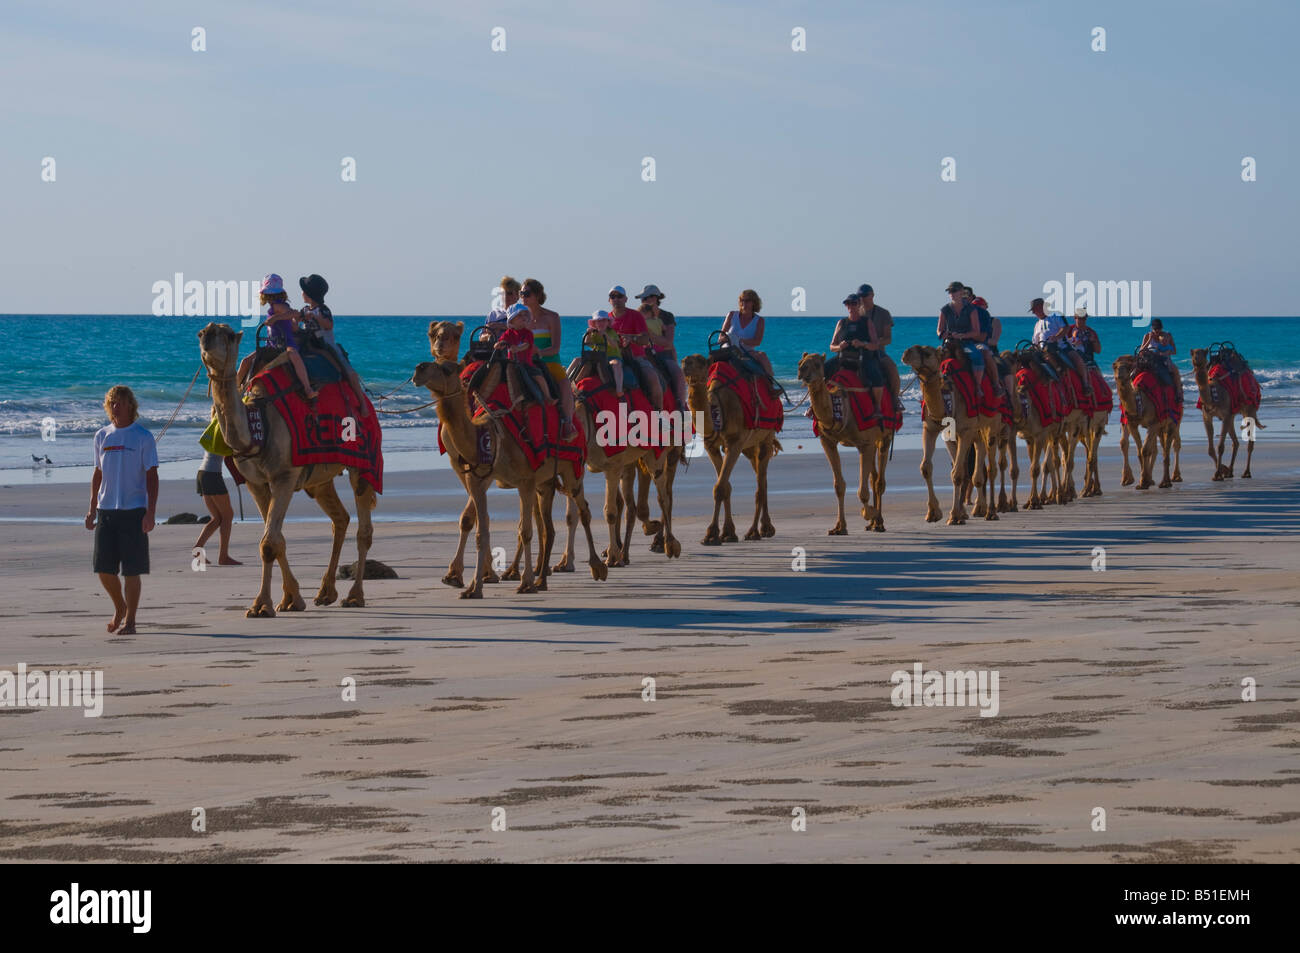 Camel riding on Cable Beach Broome Western Australia Stock Photo